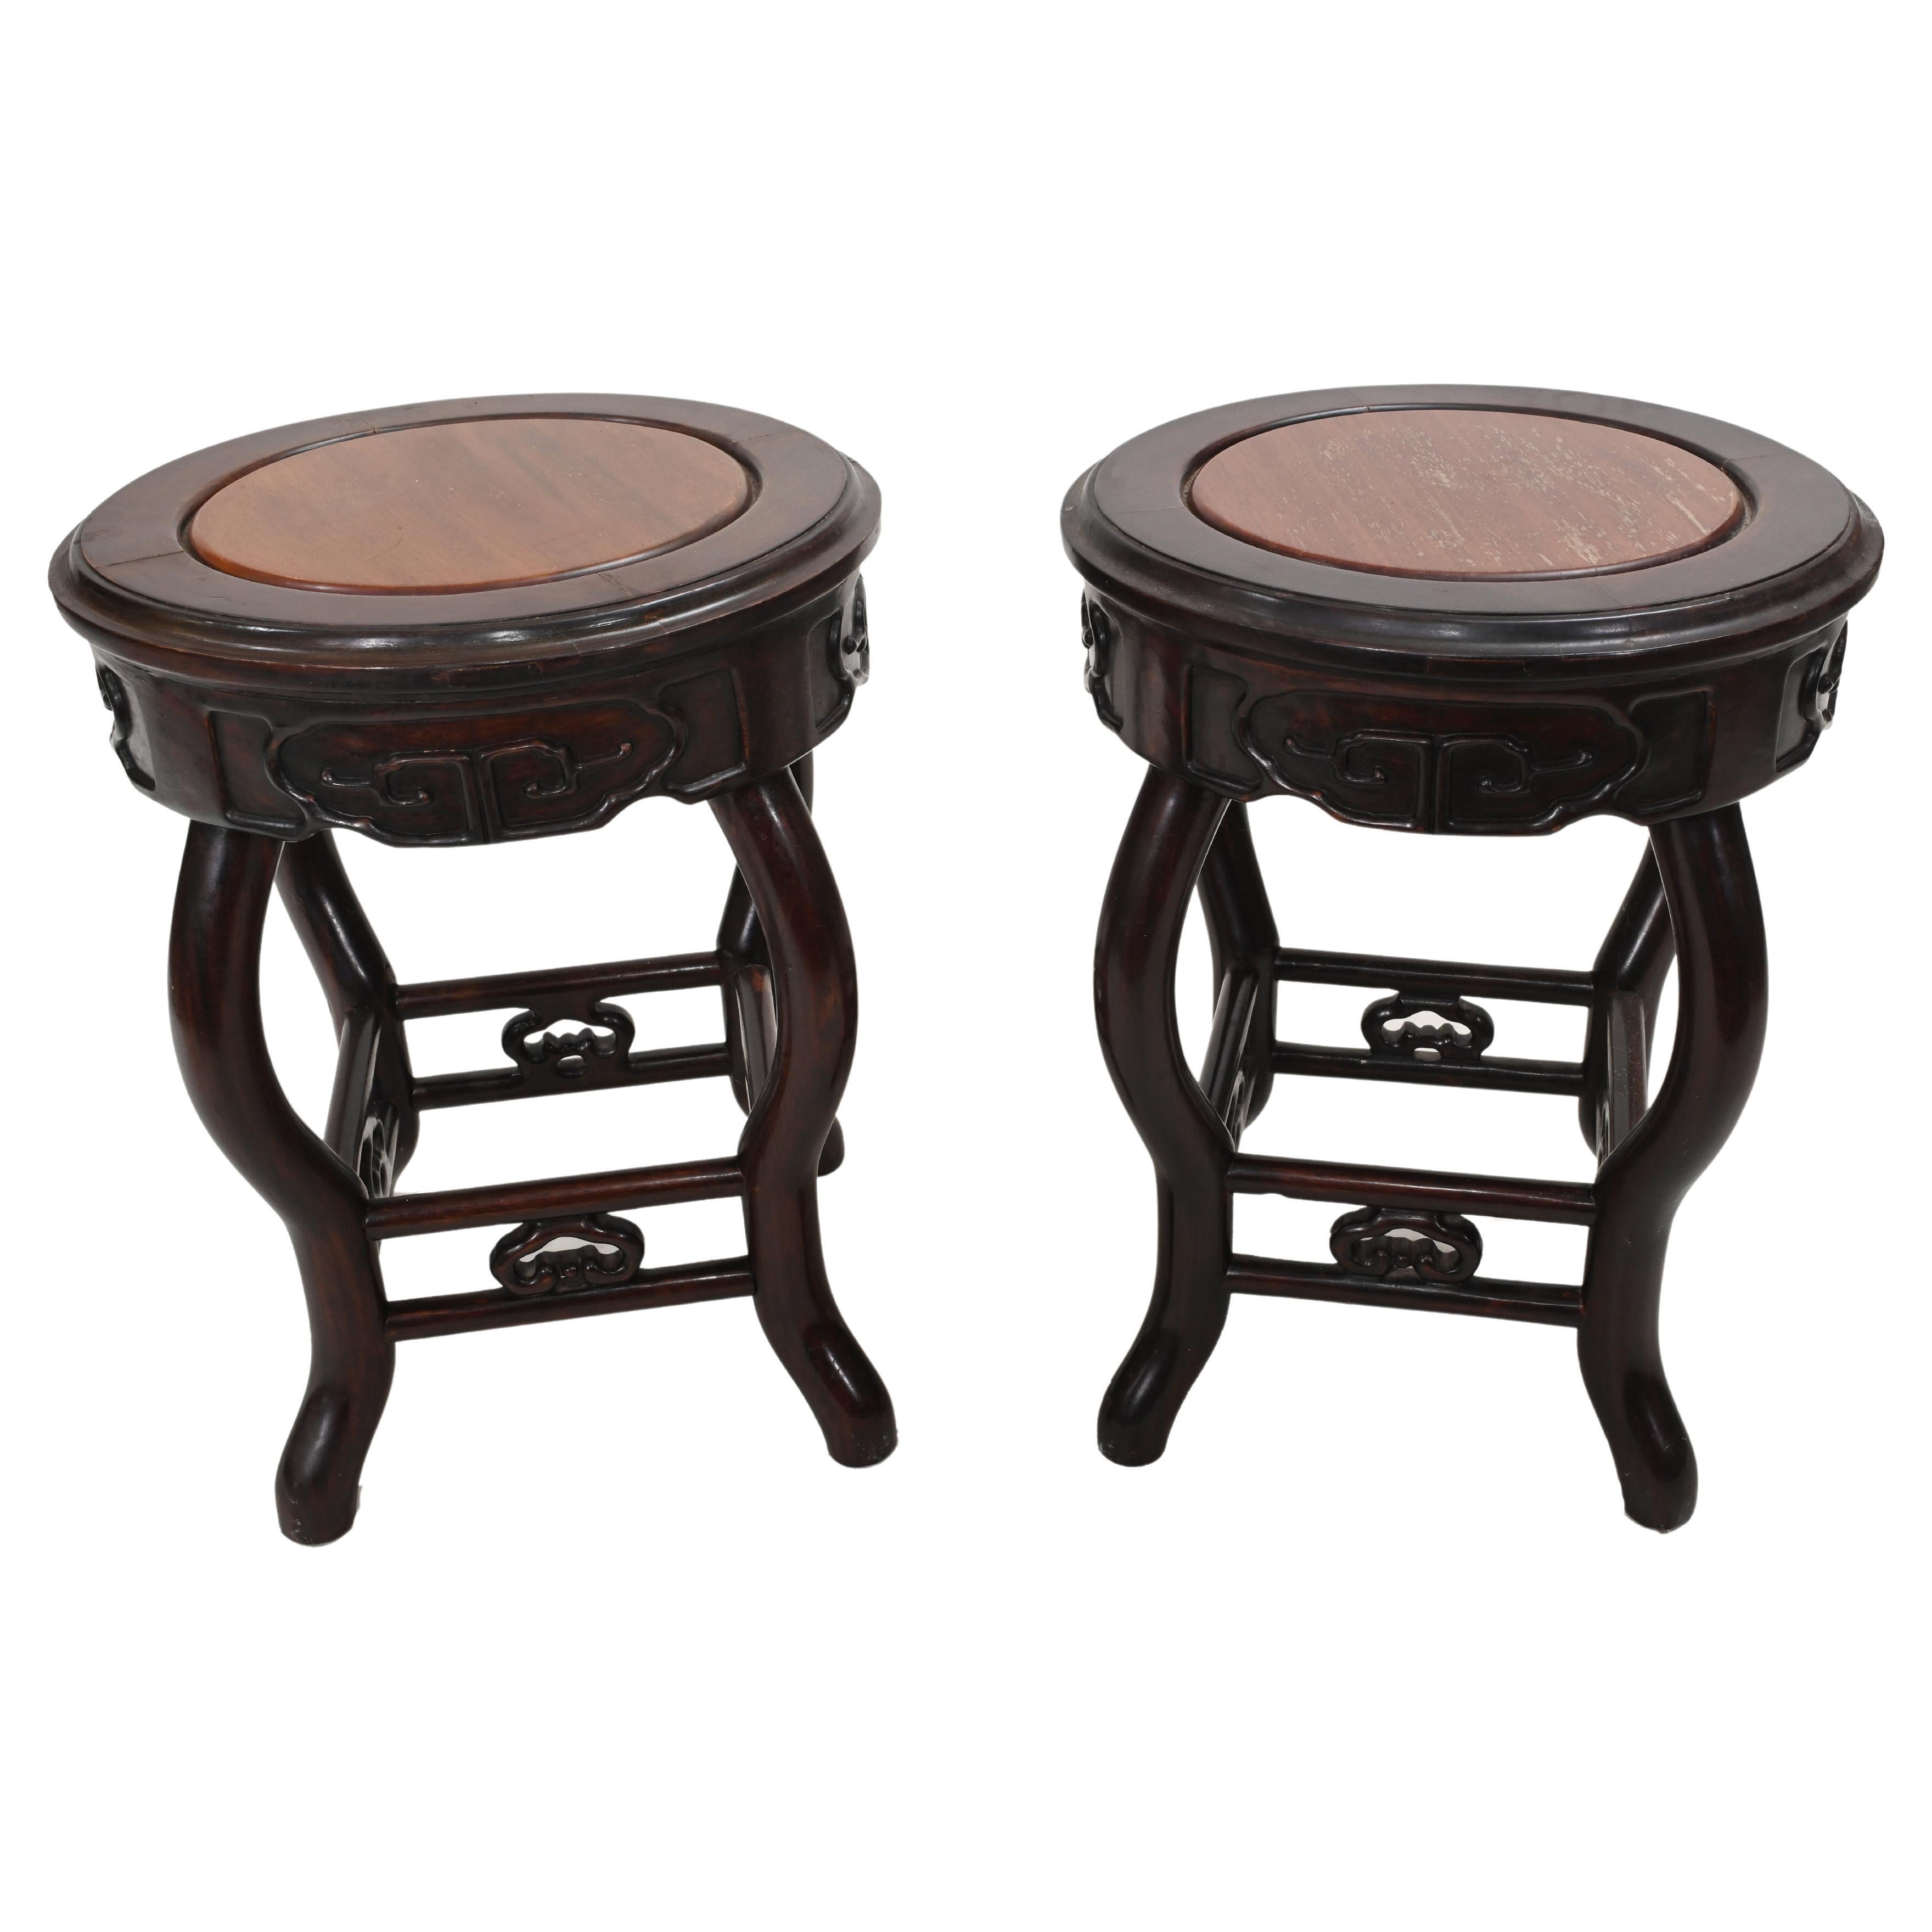 Chinese Pedestal Stands Harwood Antique Tables